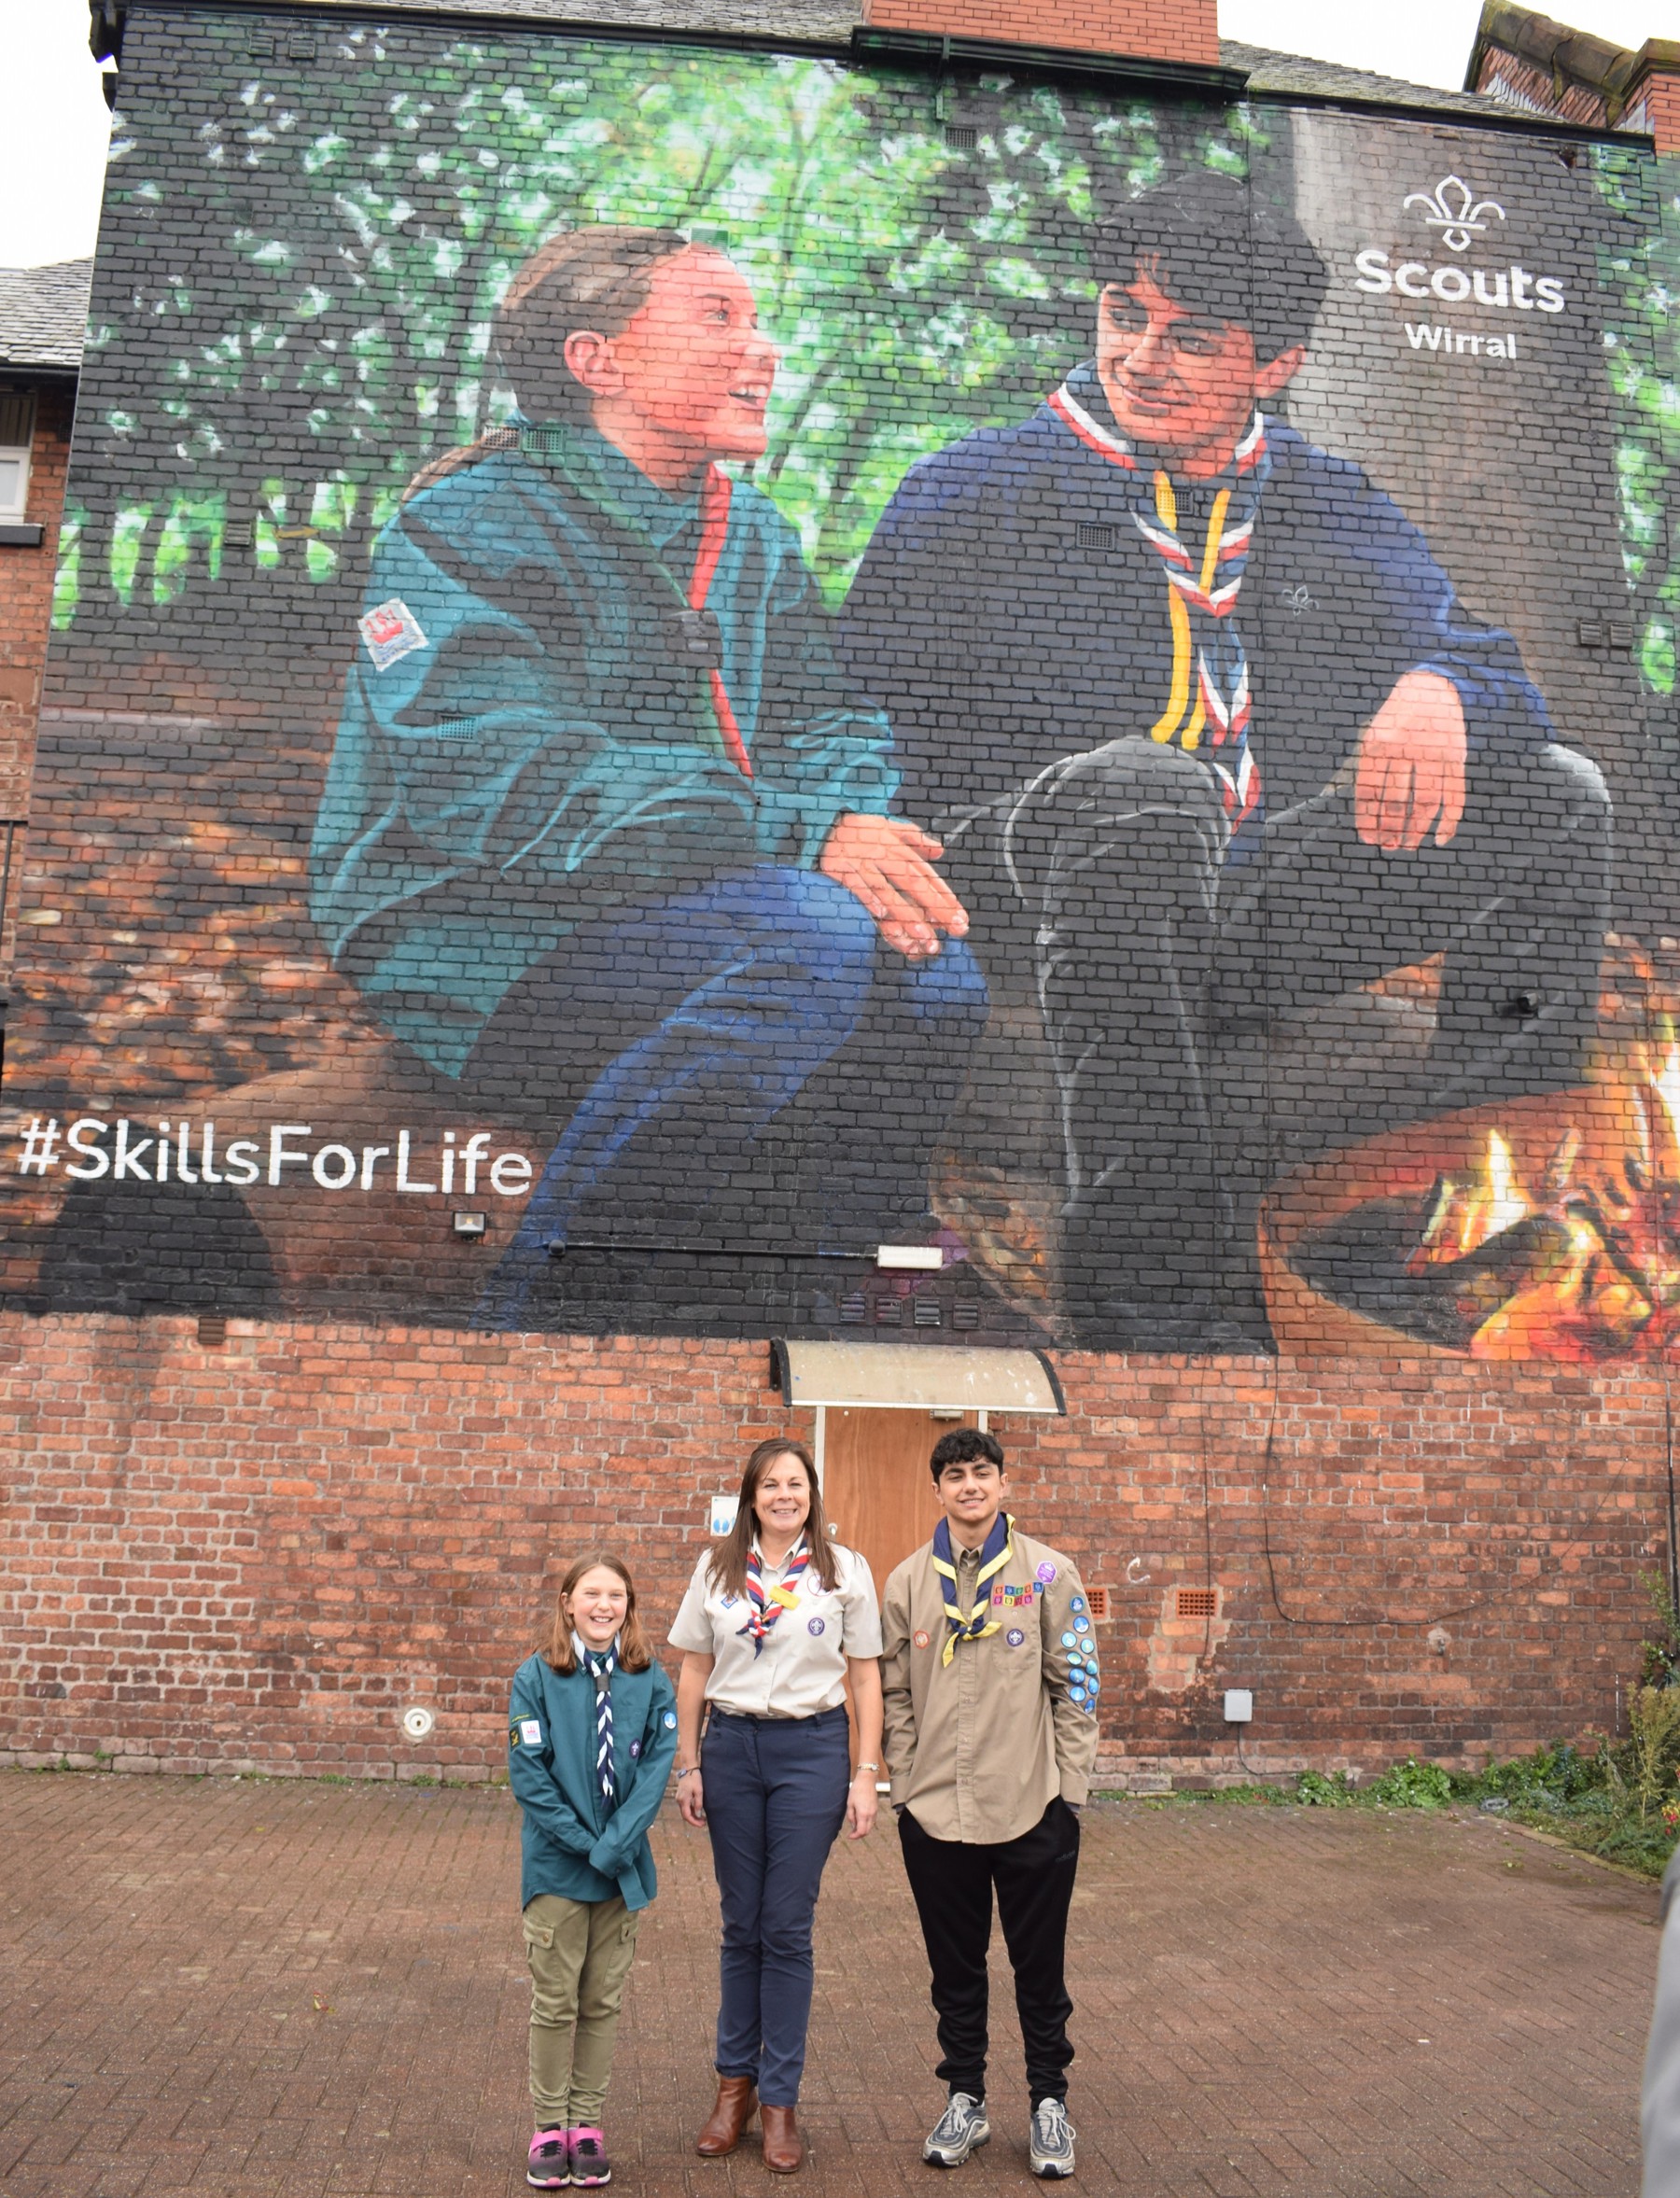 Chief Commissioner for England, Liz Henderson, stands in between Beatrice and Jack, the two Scouts featured in the Wirral Scouts mural. They're stood in front of the mural in Scout uniform and are smiling at the camera.